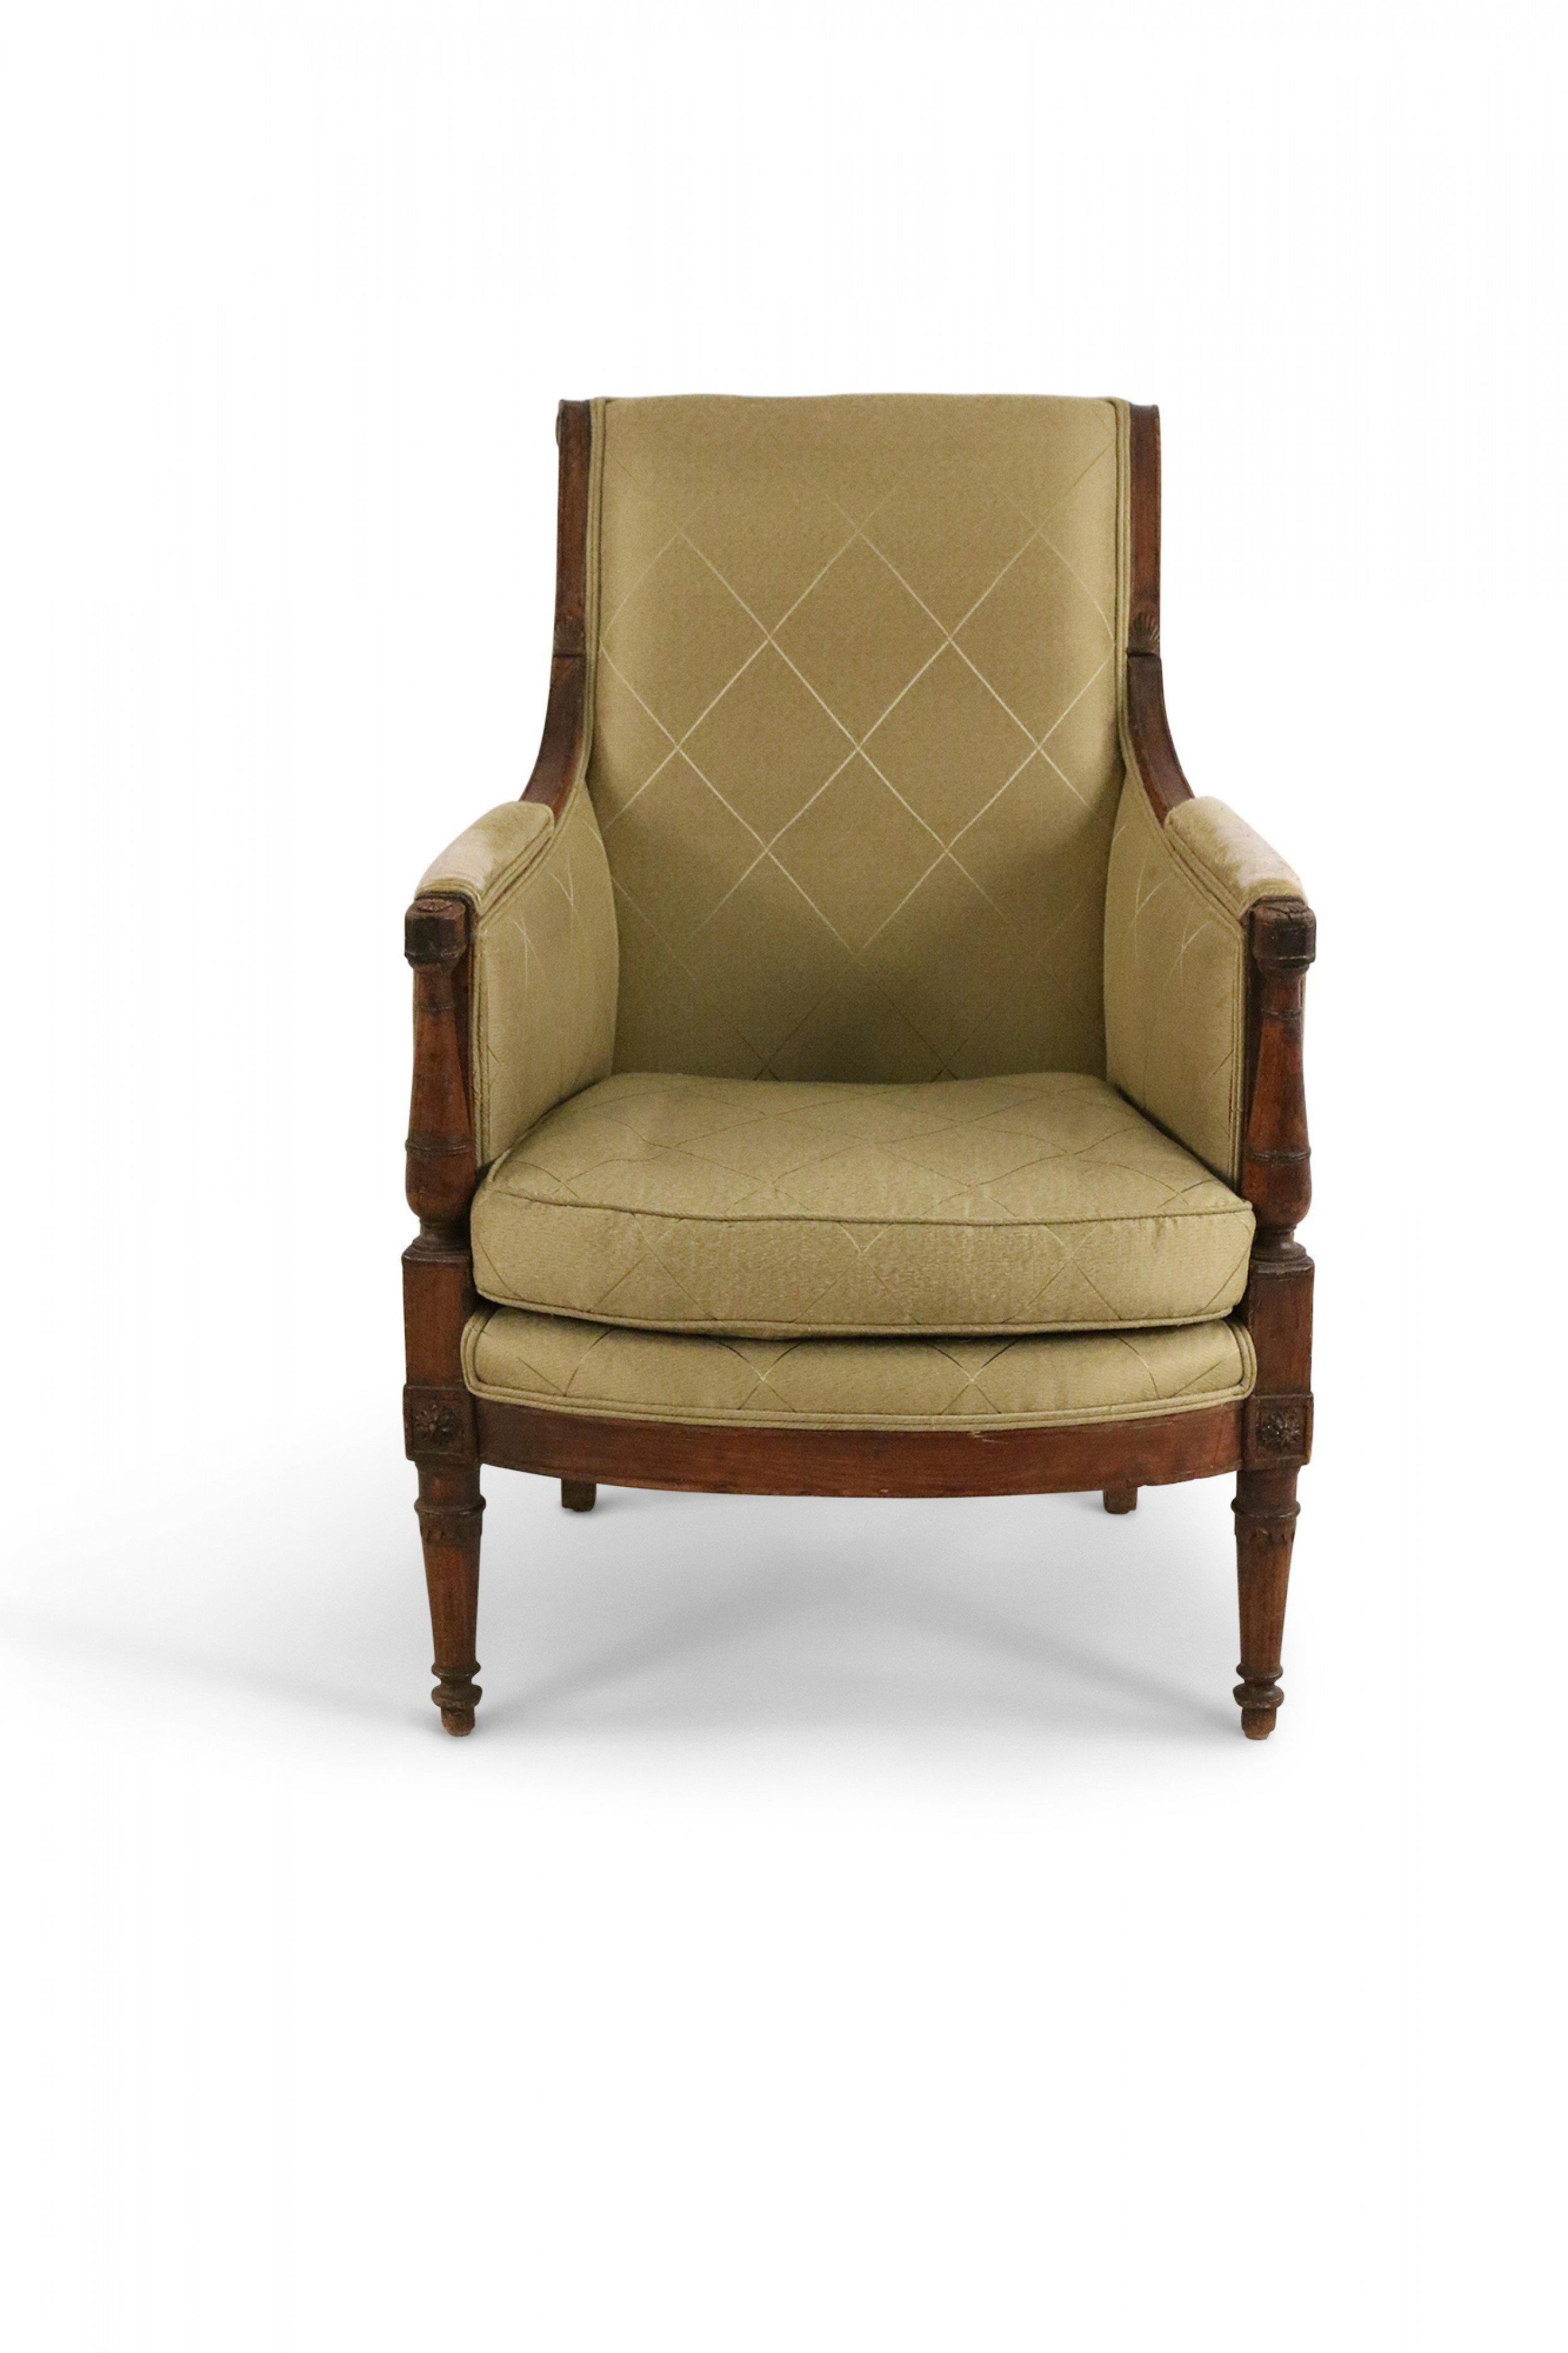 French Directoire bergere armchair with pale green diamond patterned upholstery and walnut frame with curved backrest and padded armrests on baluster-shaped supports with a seat raised on baluster-shaped and sabre legs.(Companion piece: 062745,